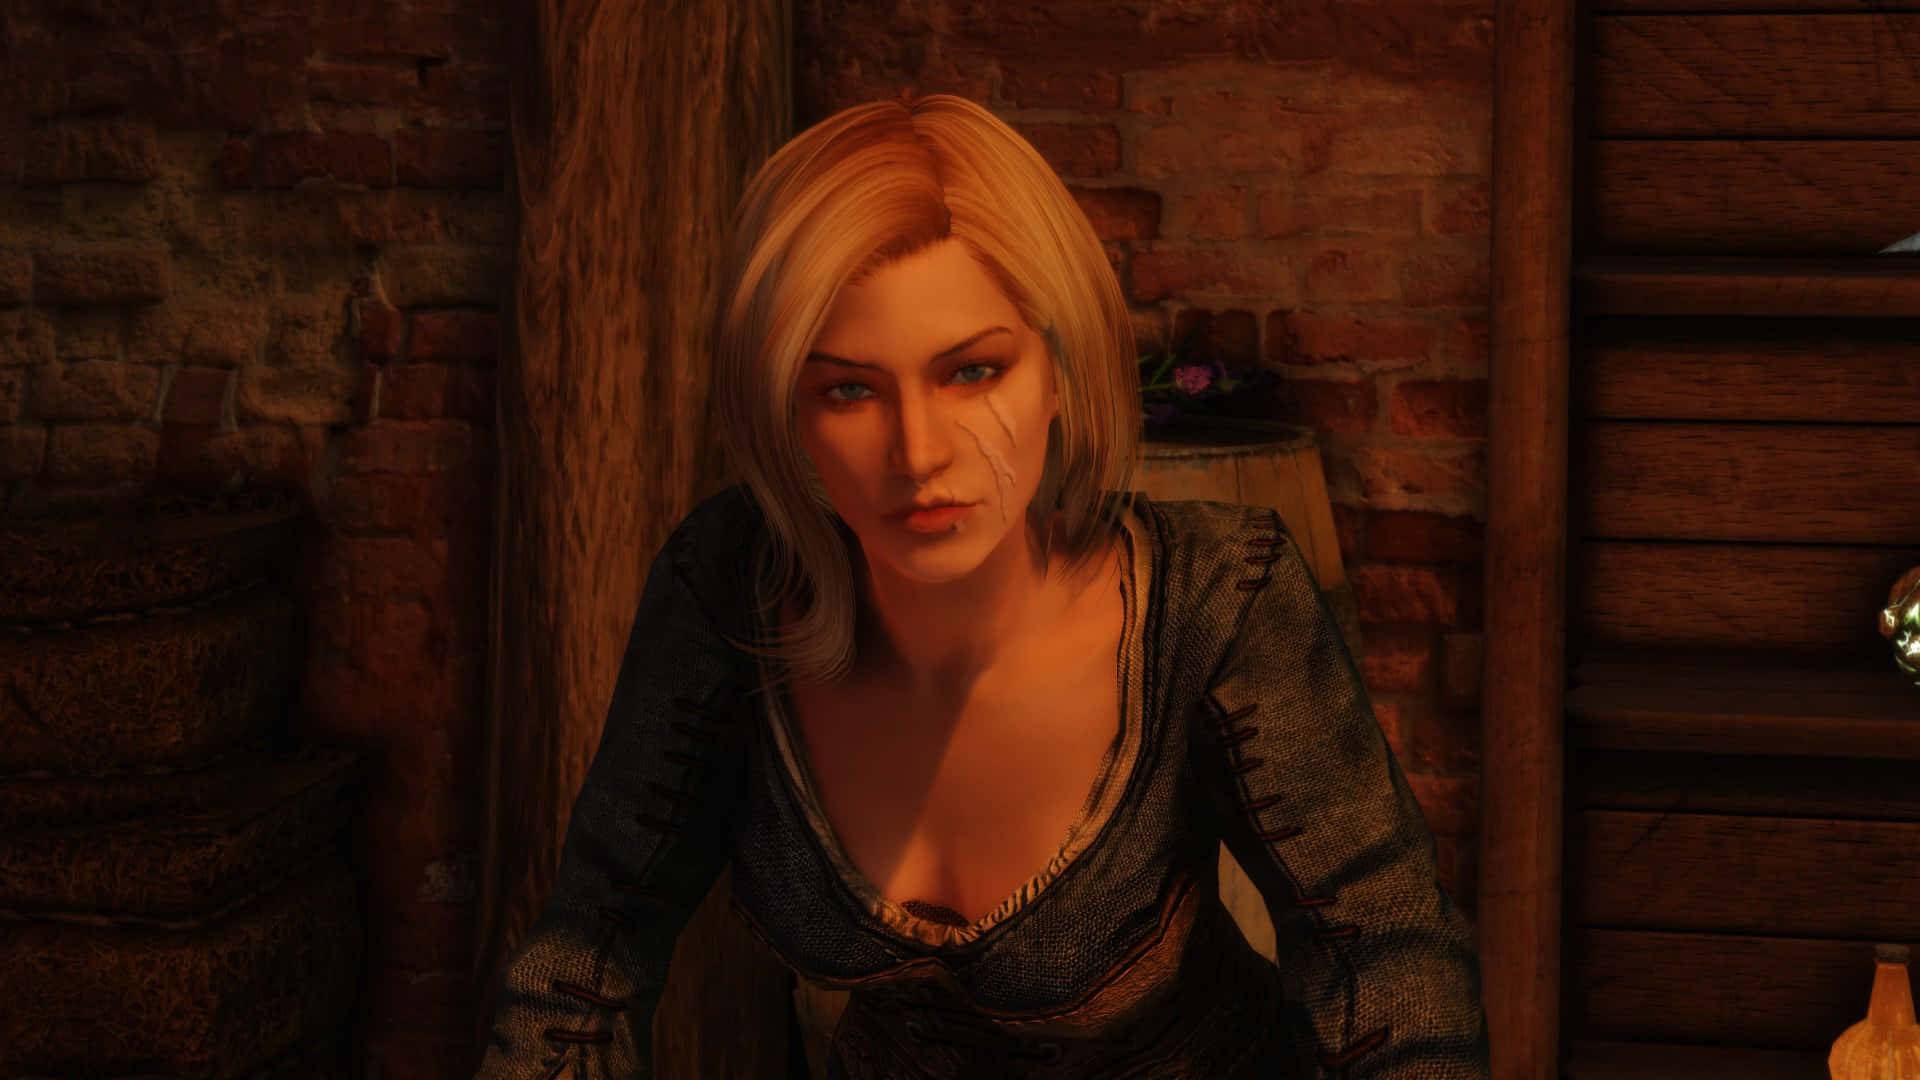 Delphine, the fearless Blade agent in Skyrim Wallpaper